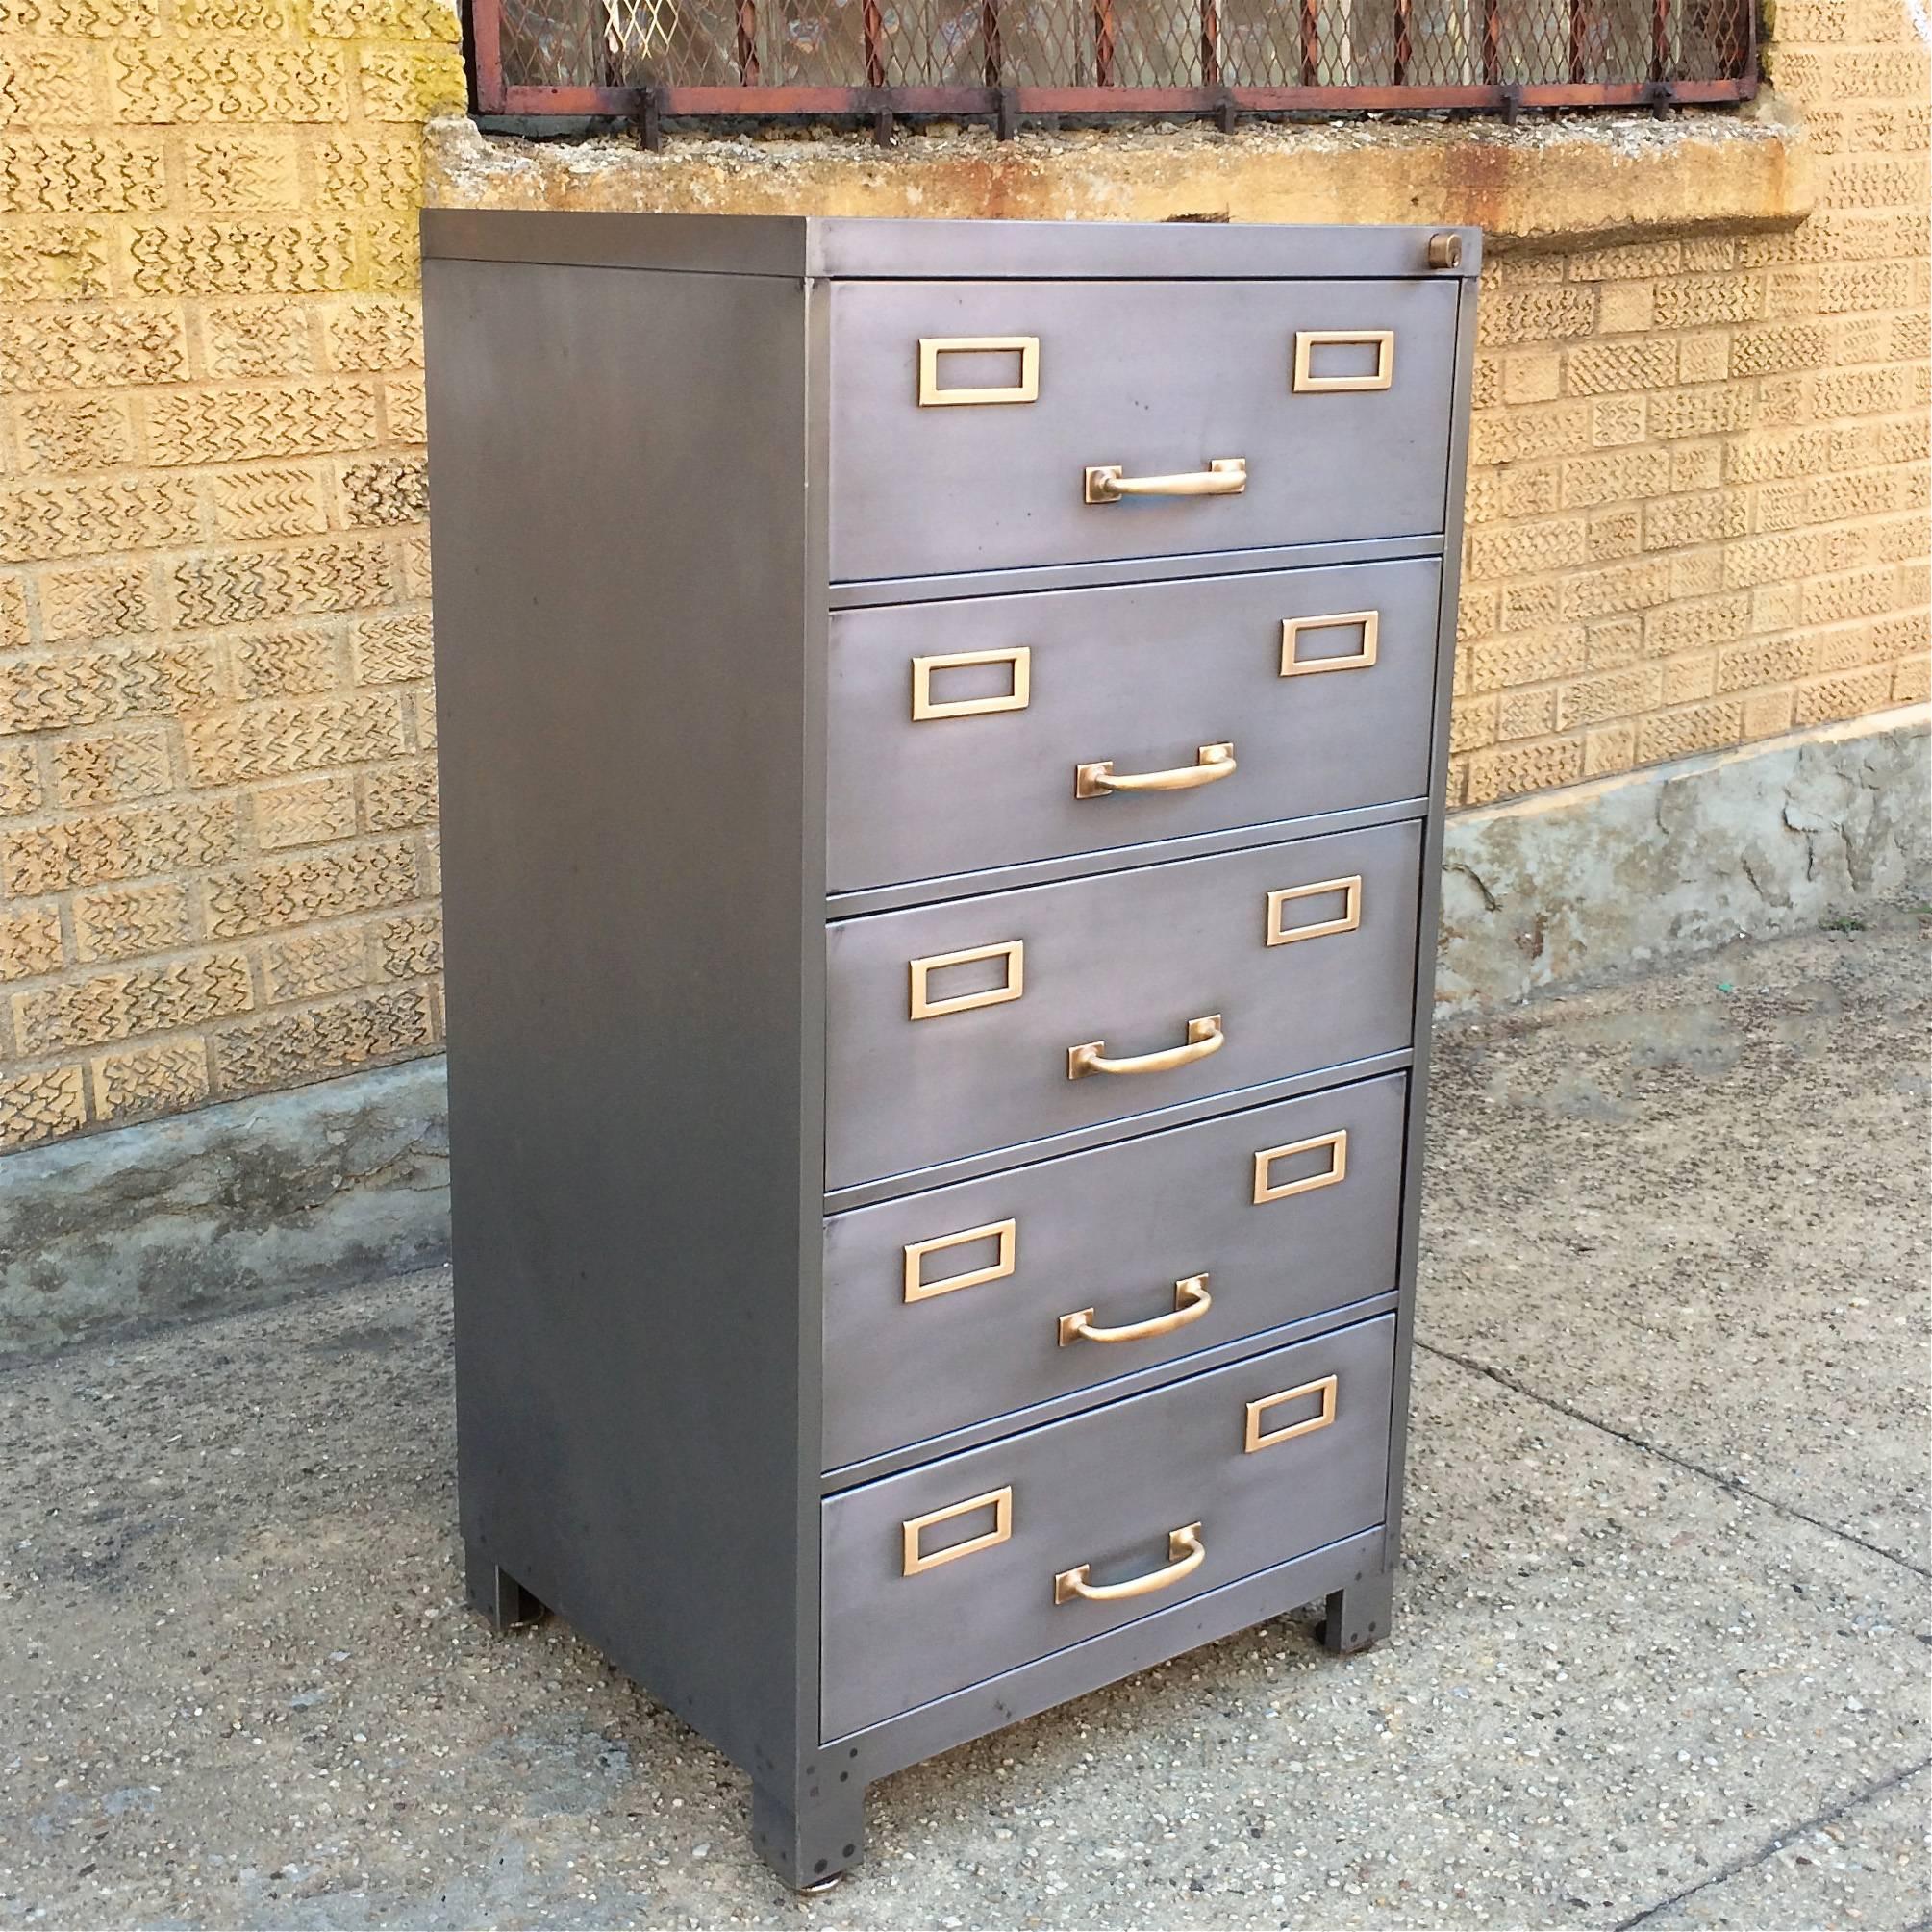 Mid-Century, hand-polished, brushed steel, 5 drawer, office, filing cabinet with polished brass hardware by Cole Steel. The cabinet is not hanging file folder cabinets.

Drawers measure 17.25" w x 5" ht x 16" d